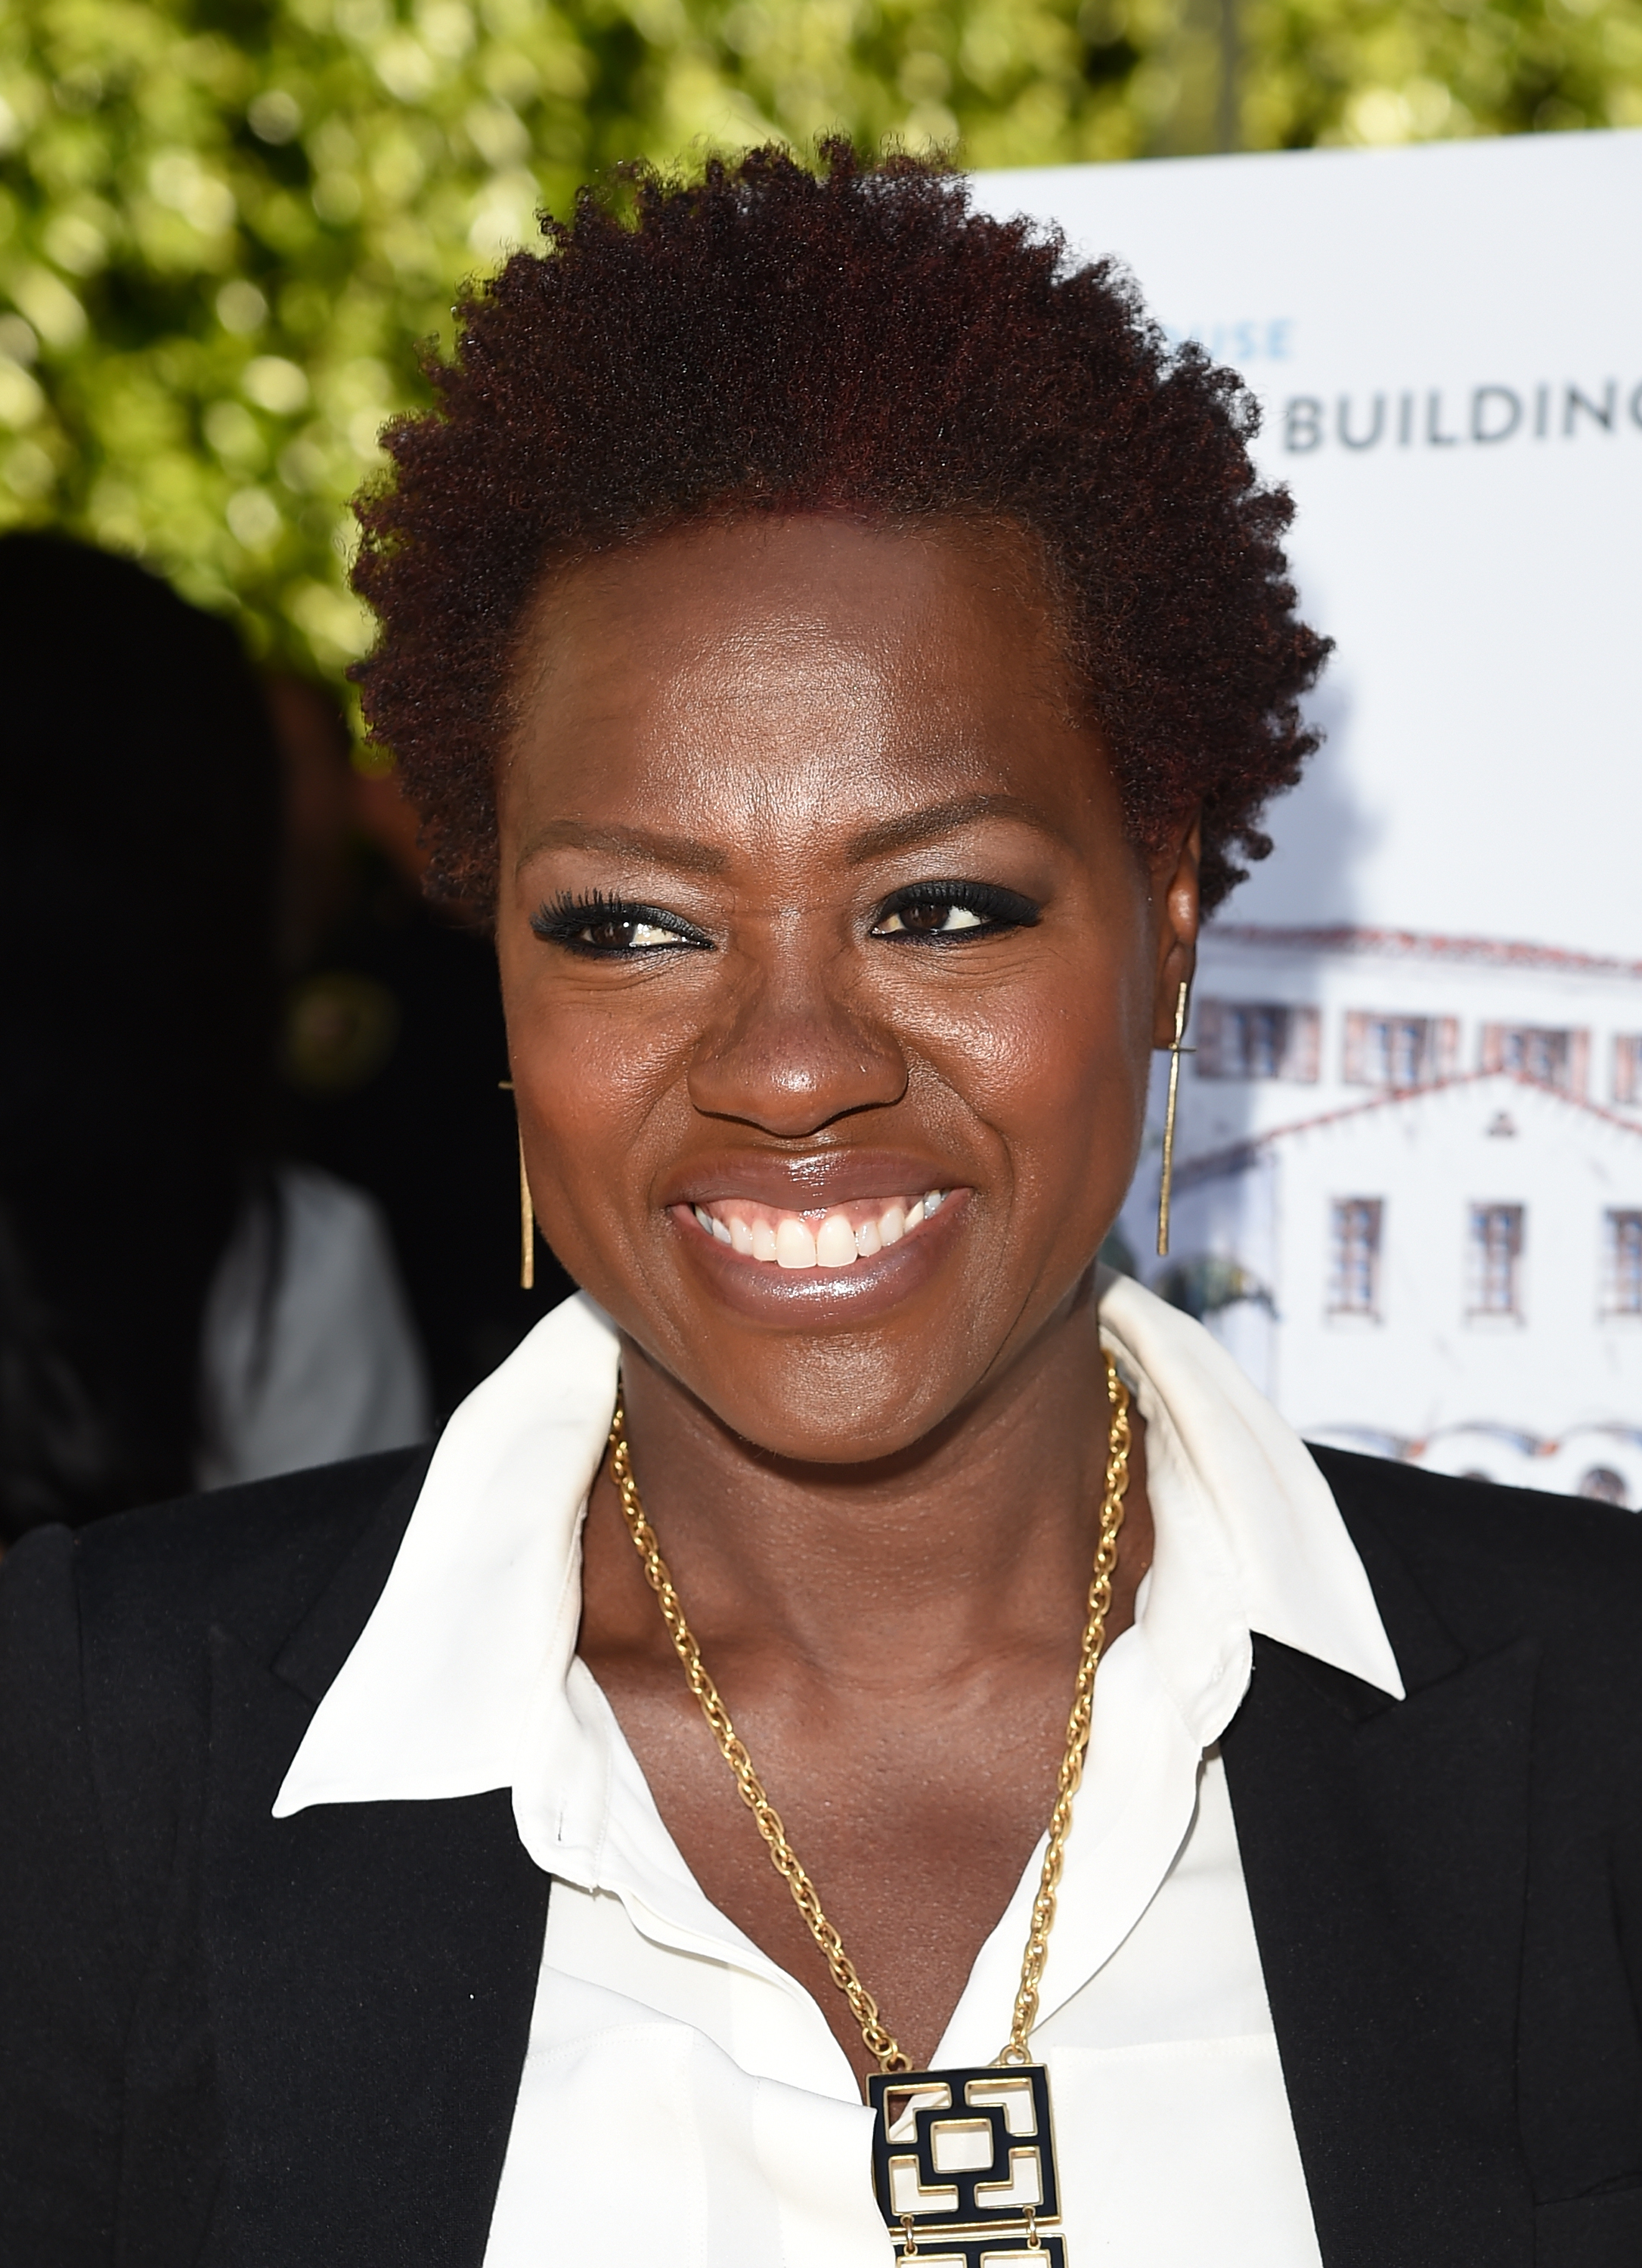 Actress Viola Davis attends The Rape Foundation's groundbreaking ceremony for construction of a New Stuart House for sexually abused children on May 2, 2014 in Santa Monica, California.